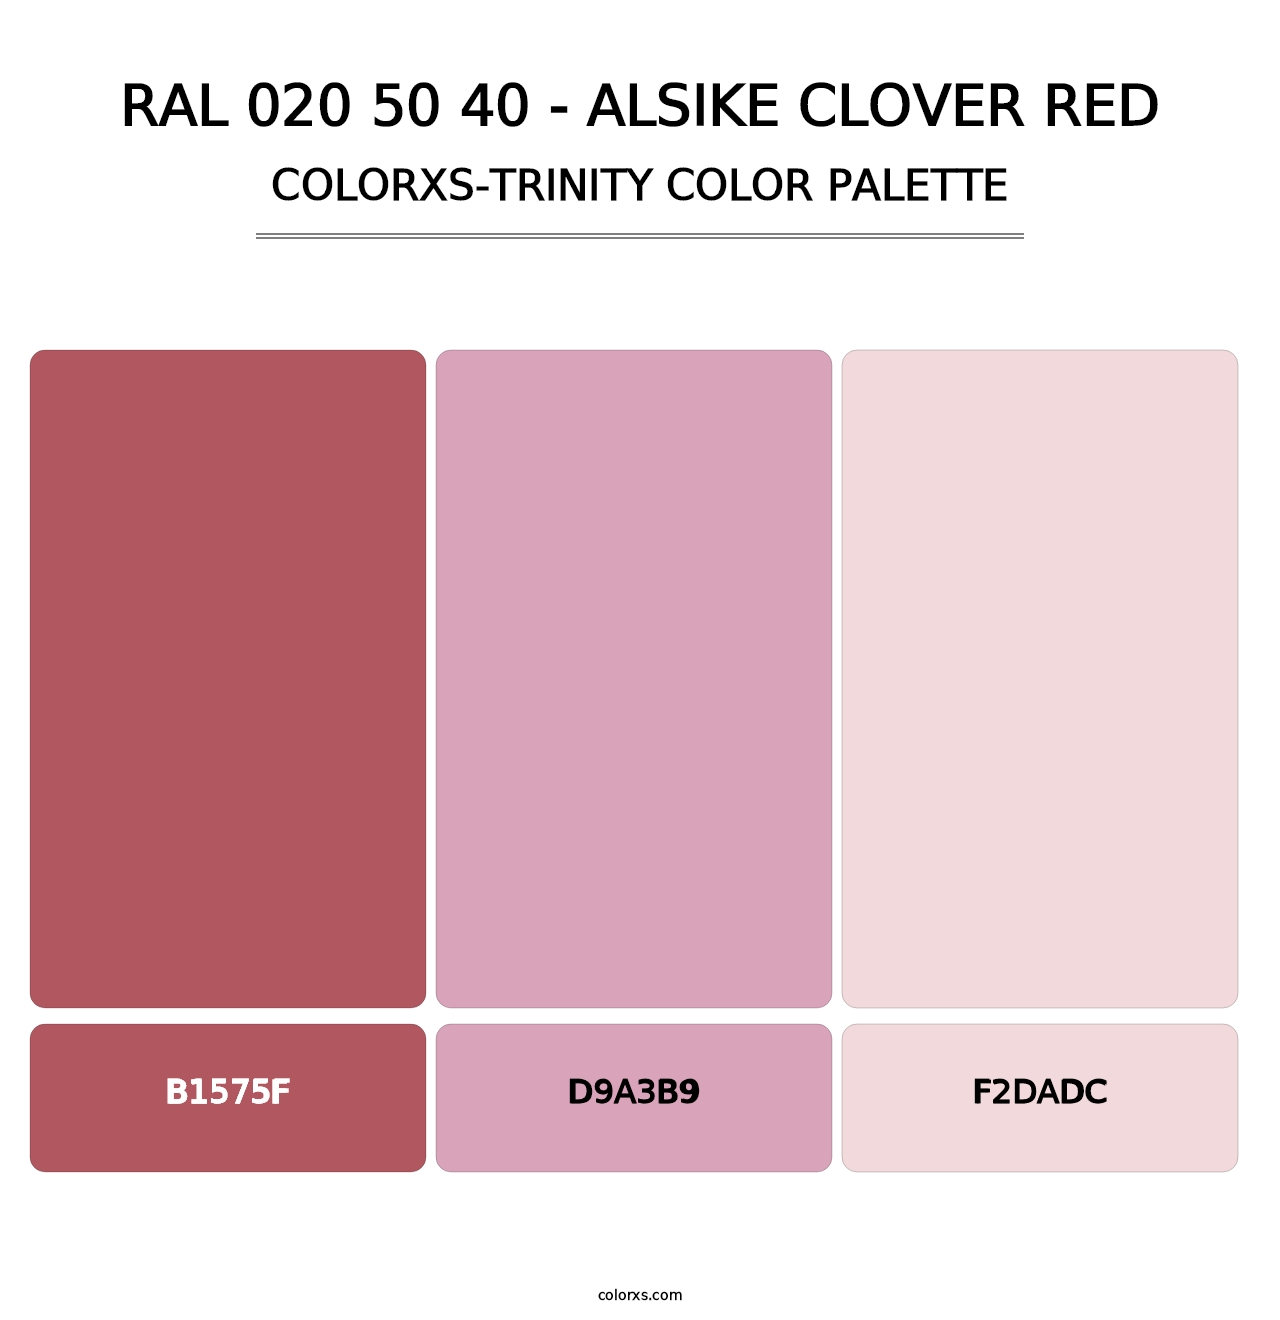 RAL 020 50 40 - Alsike Clover Red - Colorxs Trinity Palette